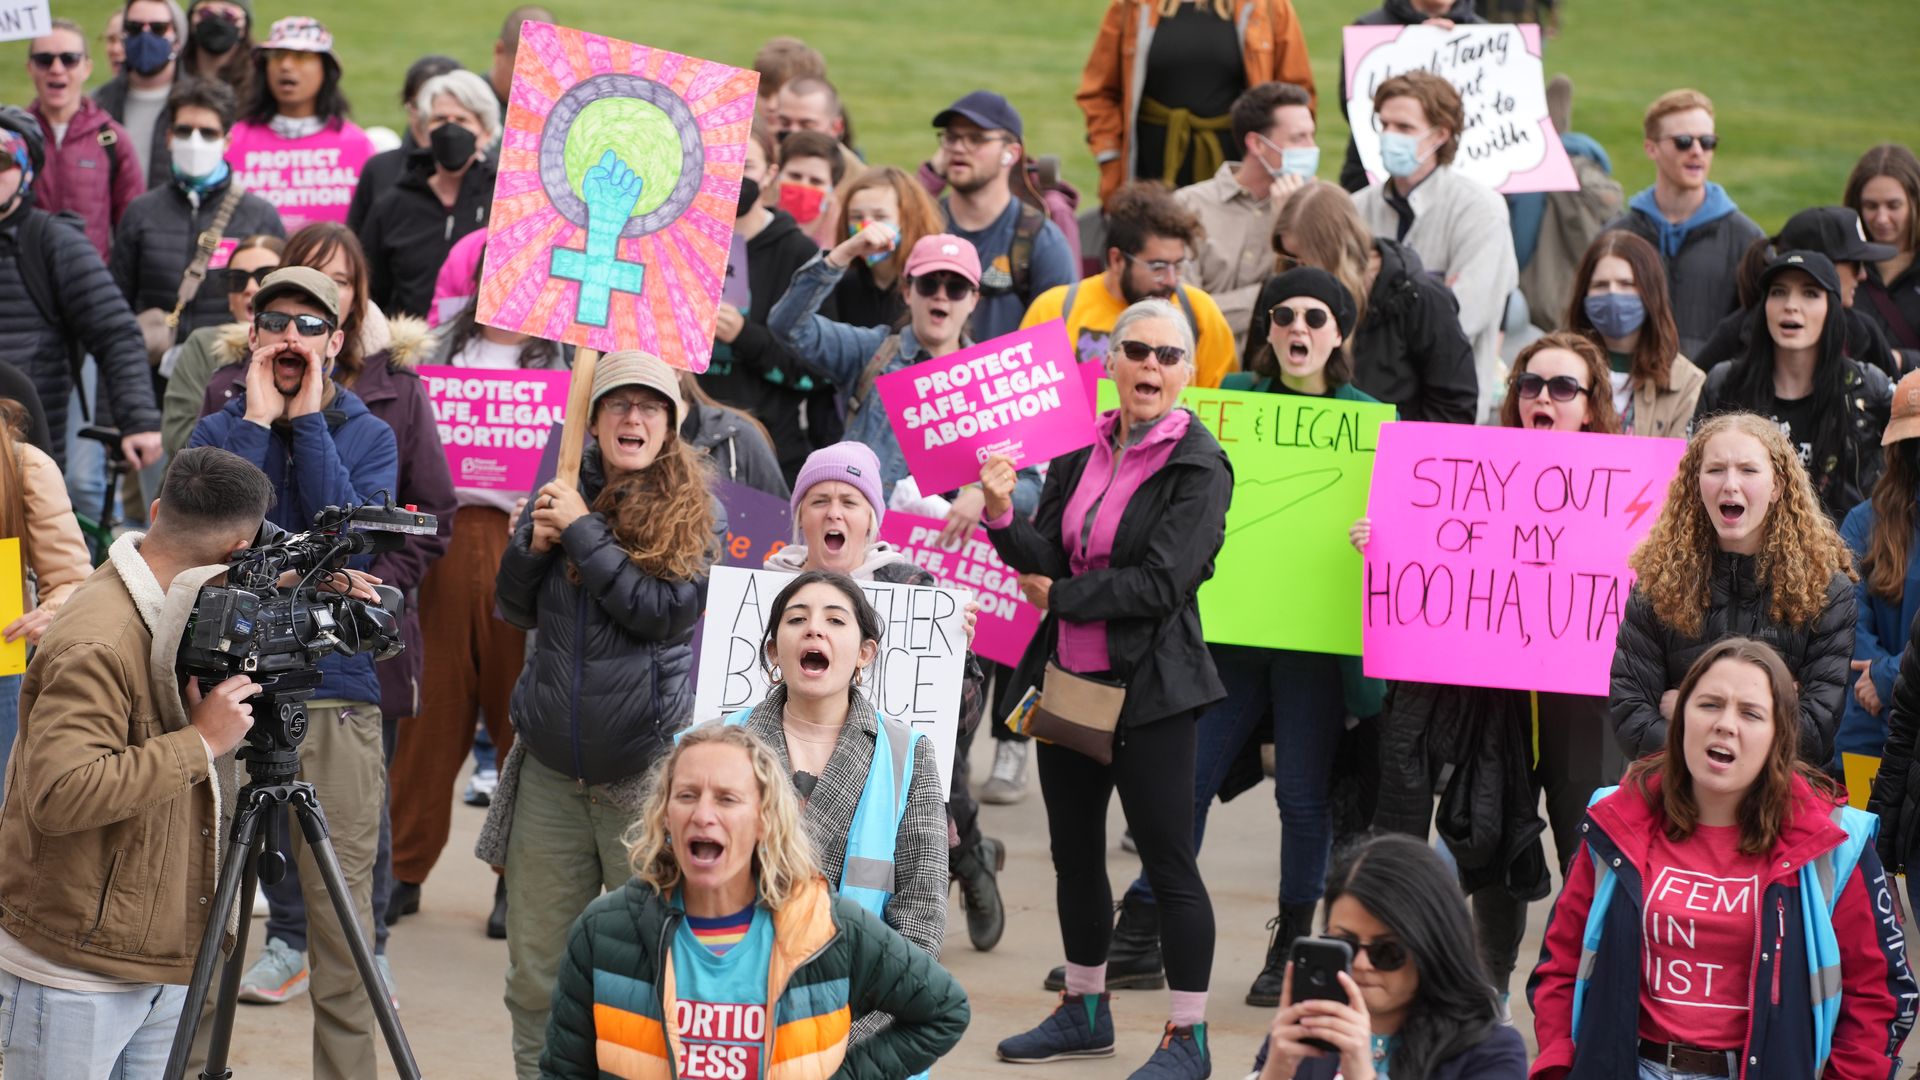 Advocates for abortion rights demonstrating outside the state capitol building in Salt Lake City, Utah, in May 2022.